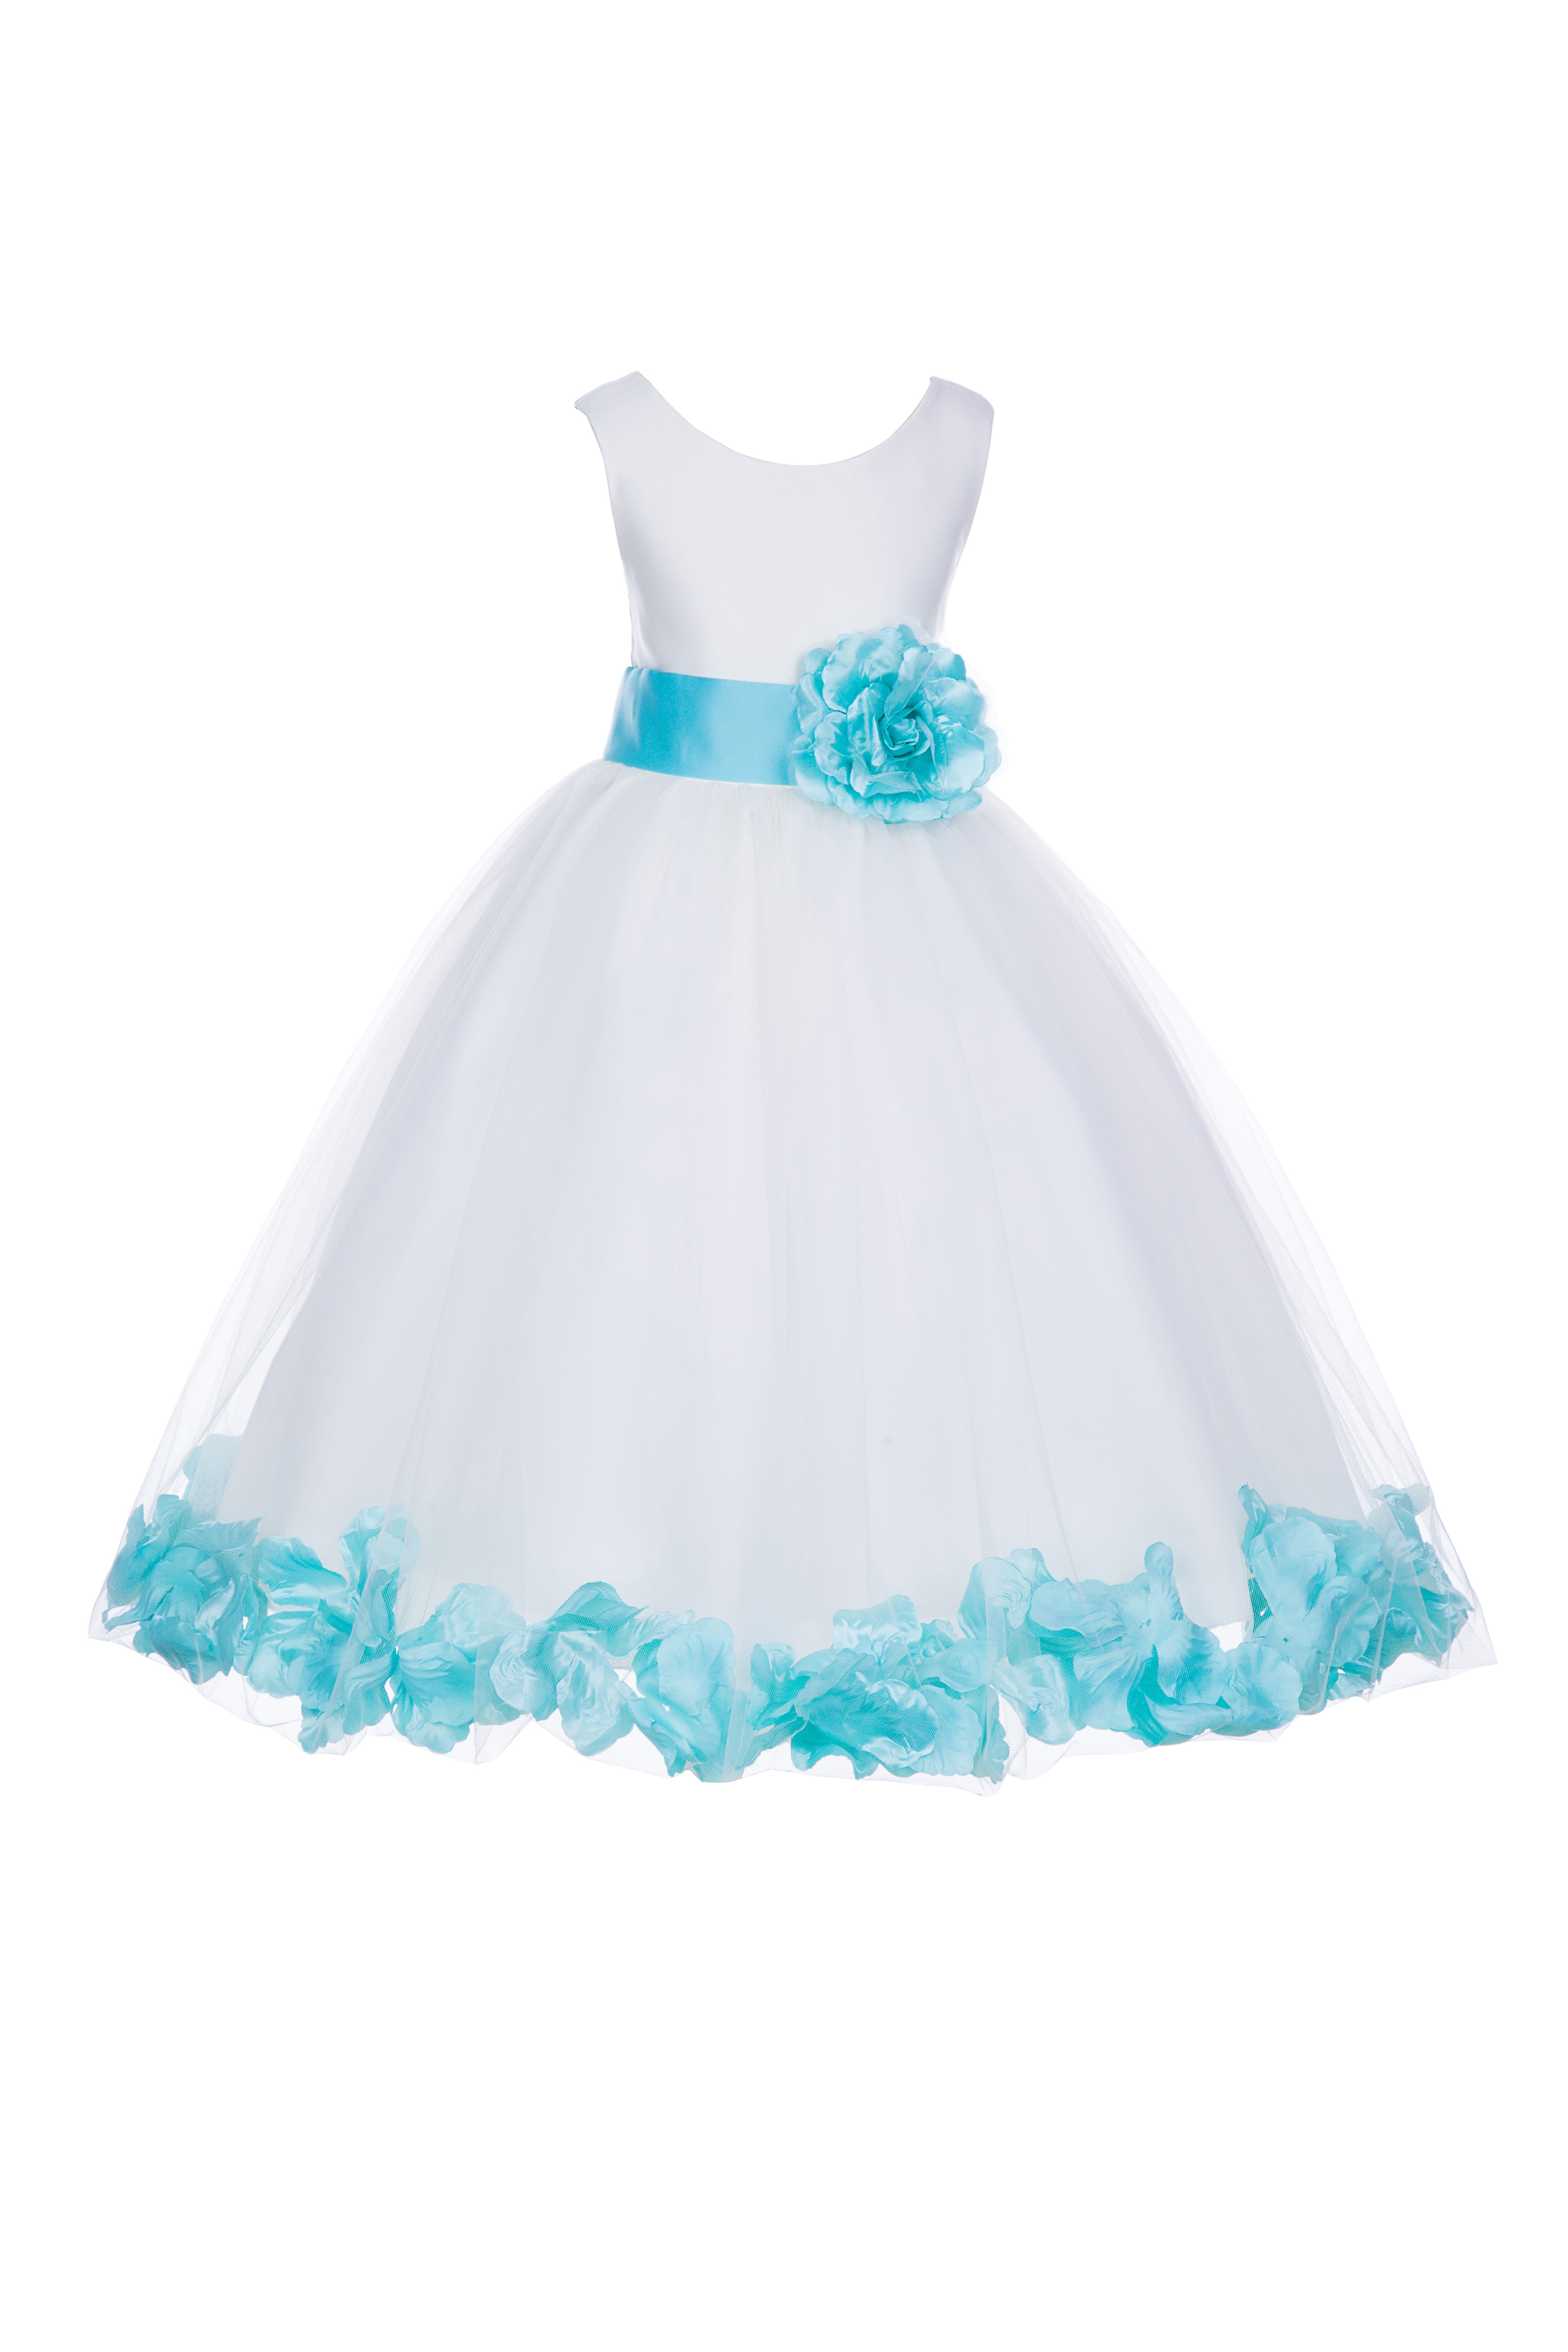 Ivory/Spa Tulle Rose Petals Flower Girl Dress Pageant 302S